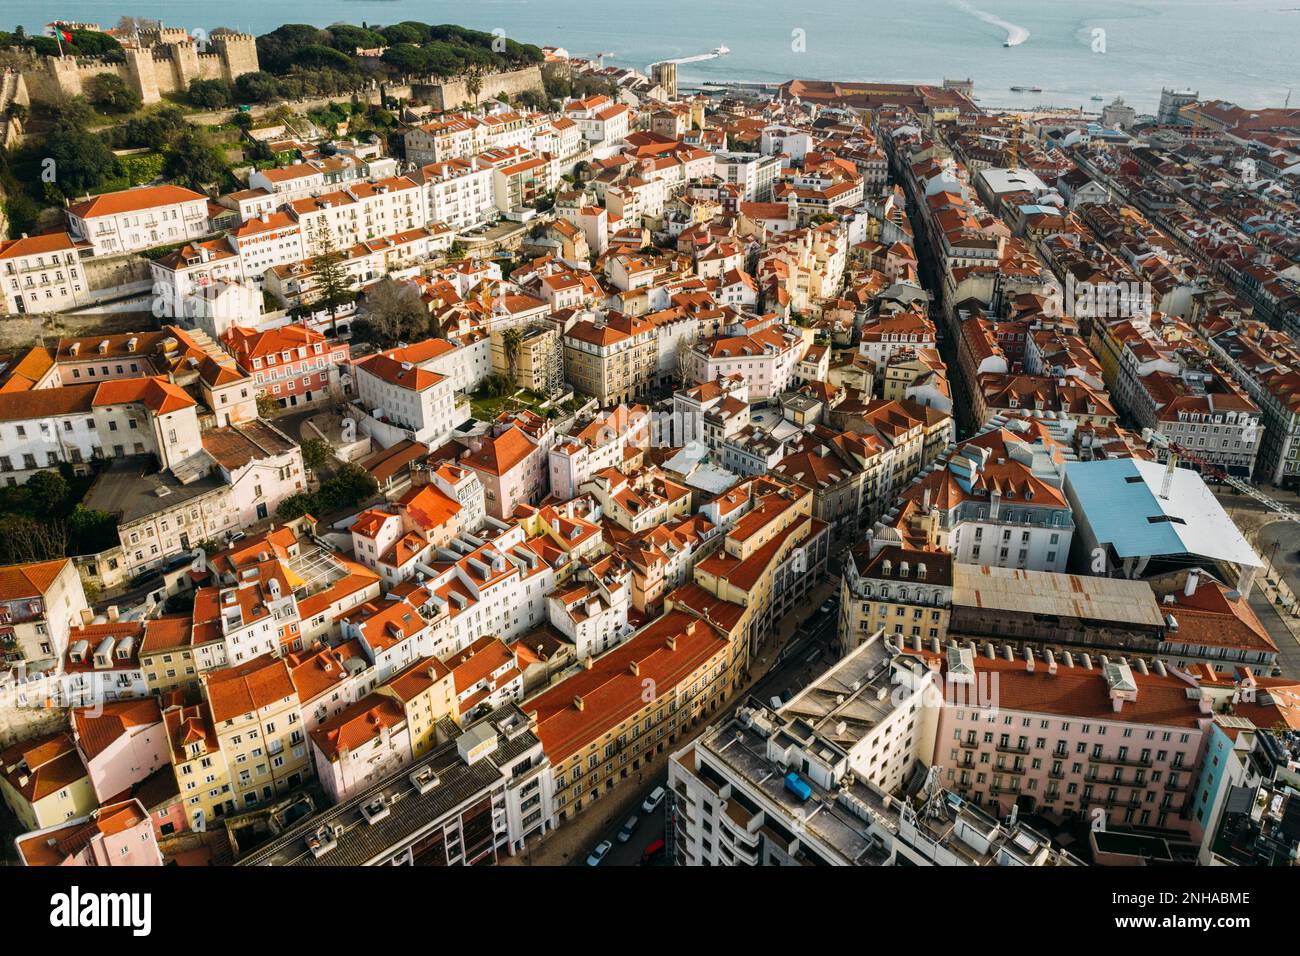 Aerial drone view of St. George Castle in Lisbon, Portugal with surrounding cityscape Stock Photo